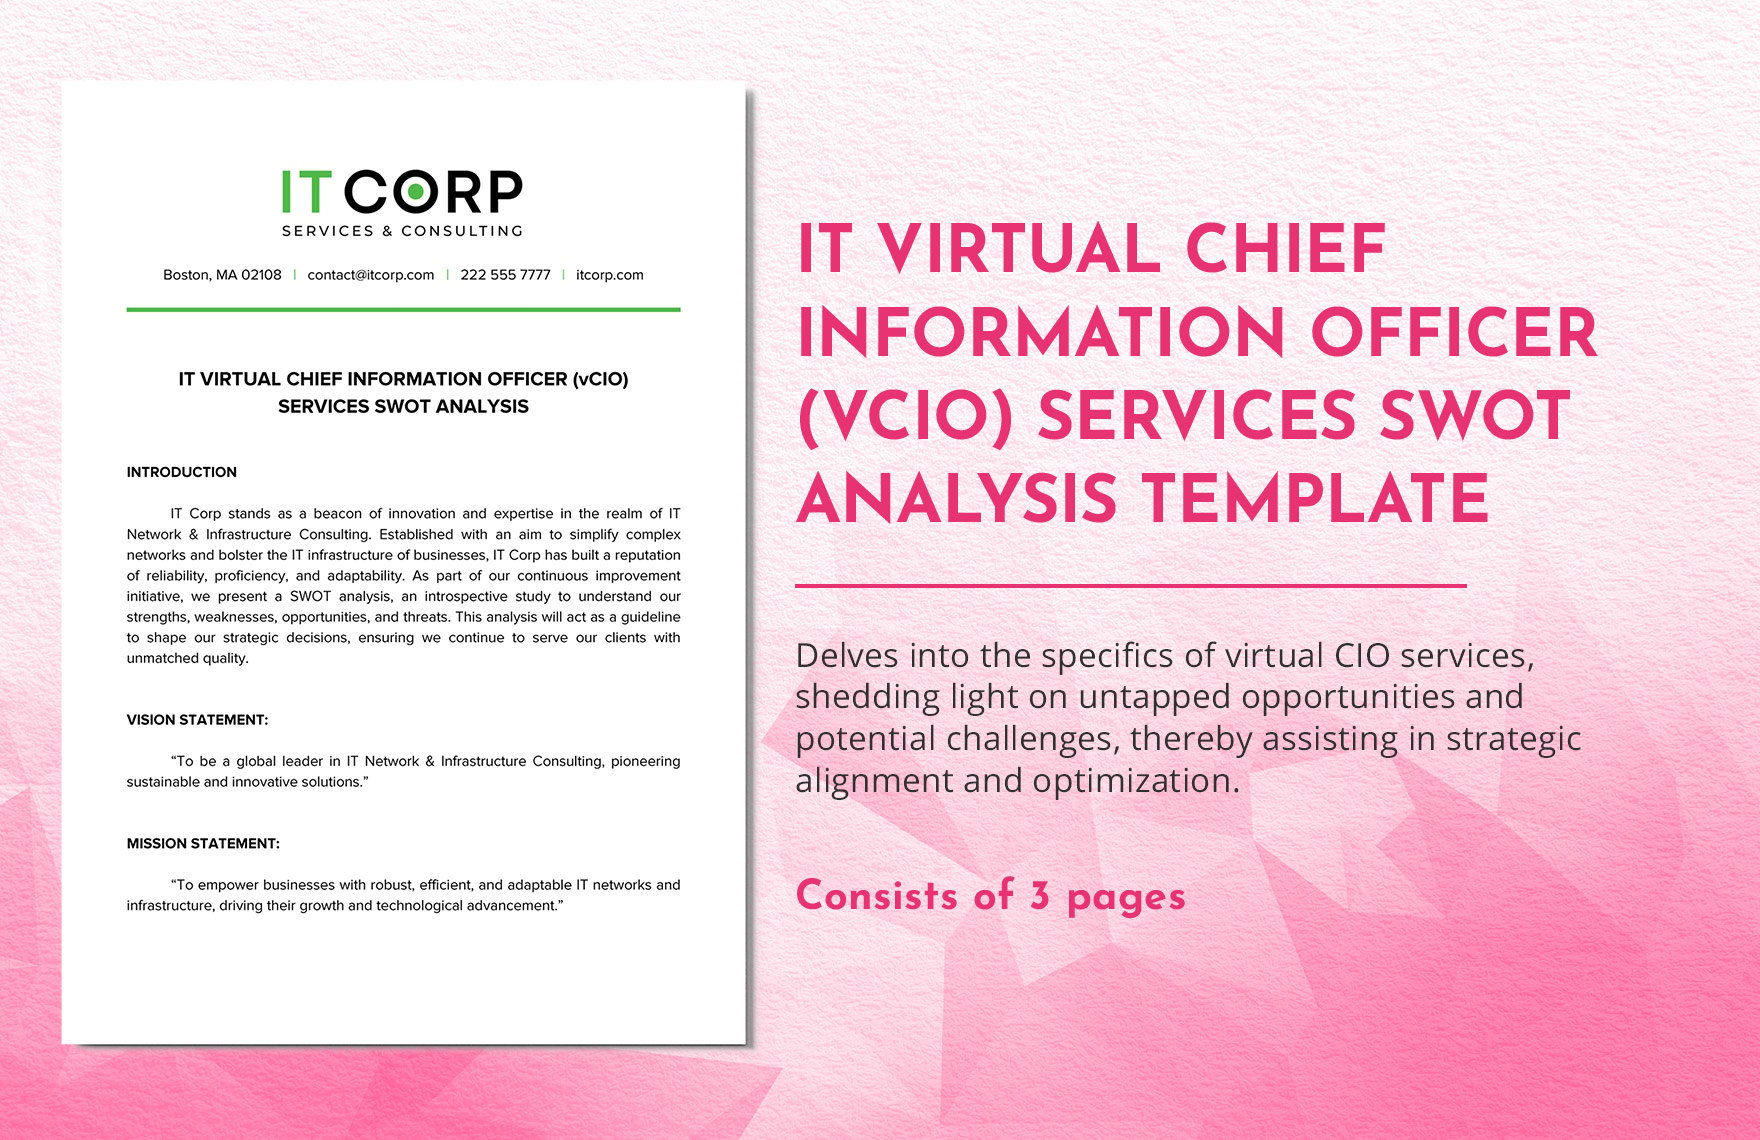 IT Virtual Chief Information Officer (vCIO) Services SWOT Analysis Template in Word, Google Docs, PDF